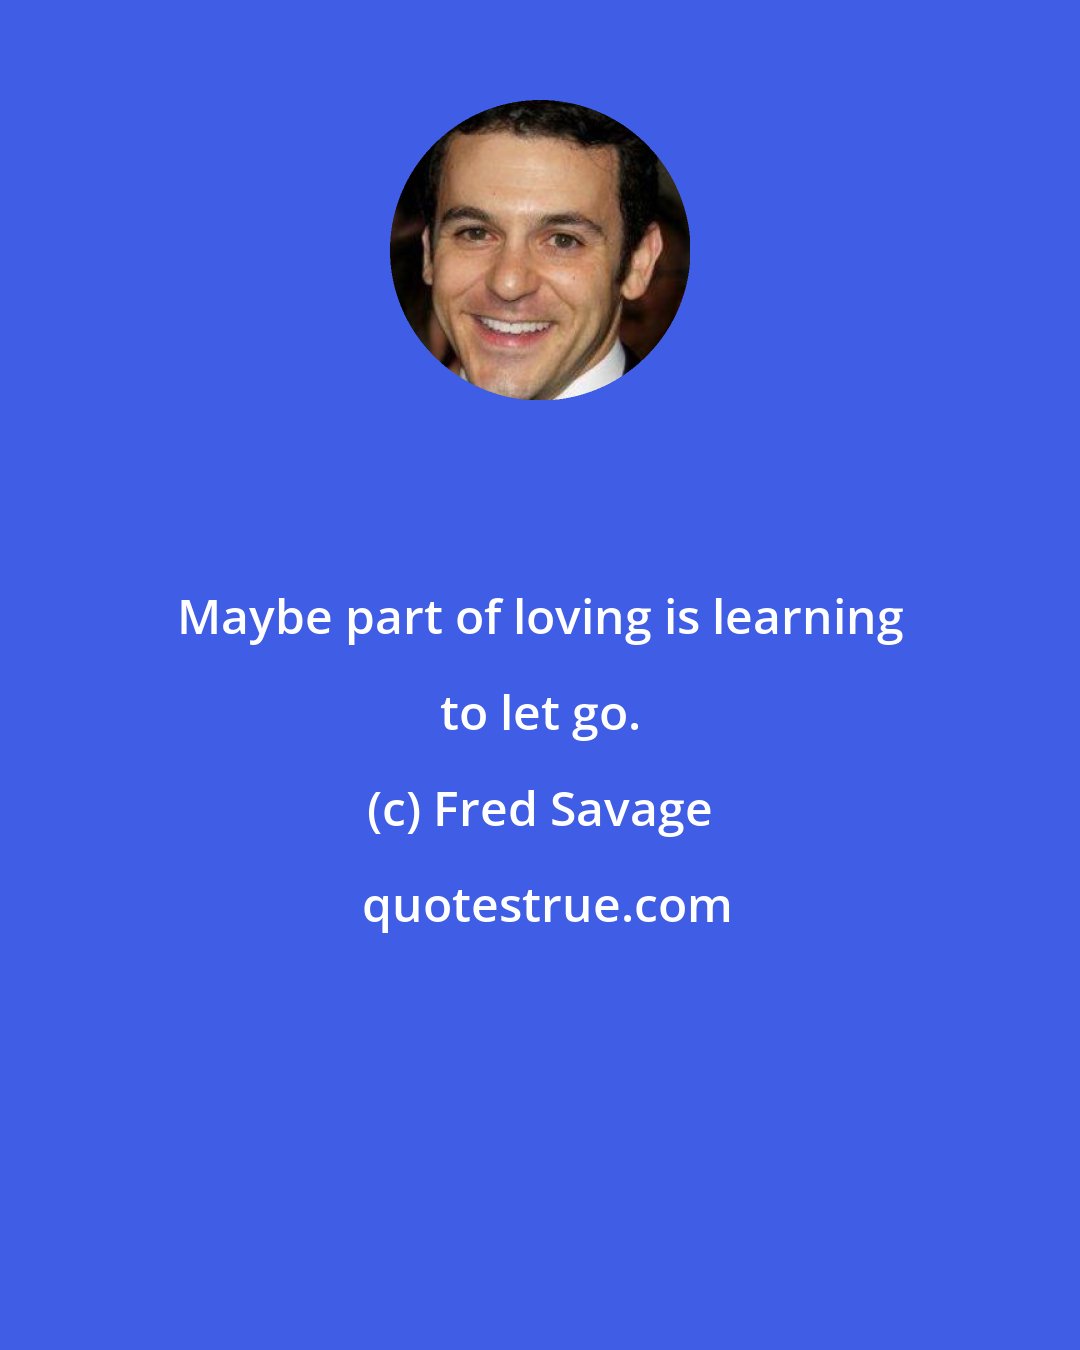 Fred Savage: Maybe part of loving is learning to let go.